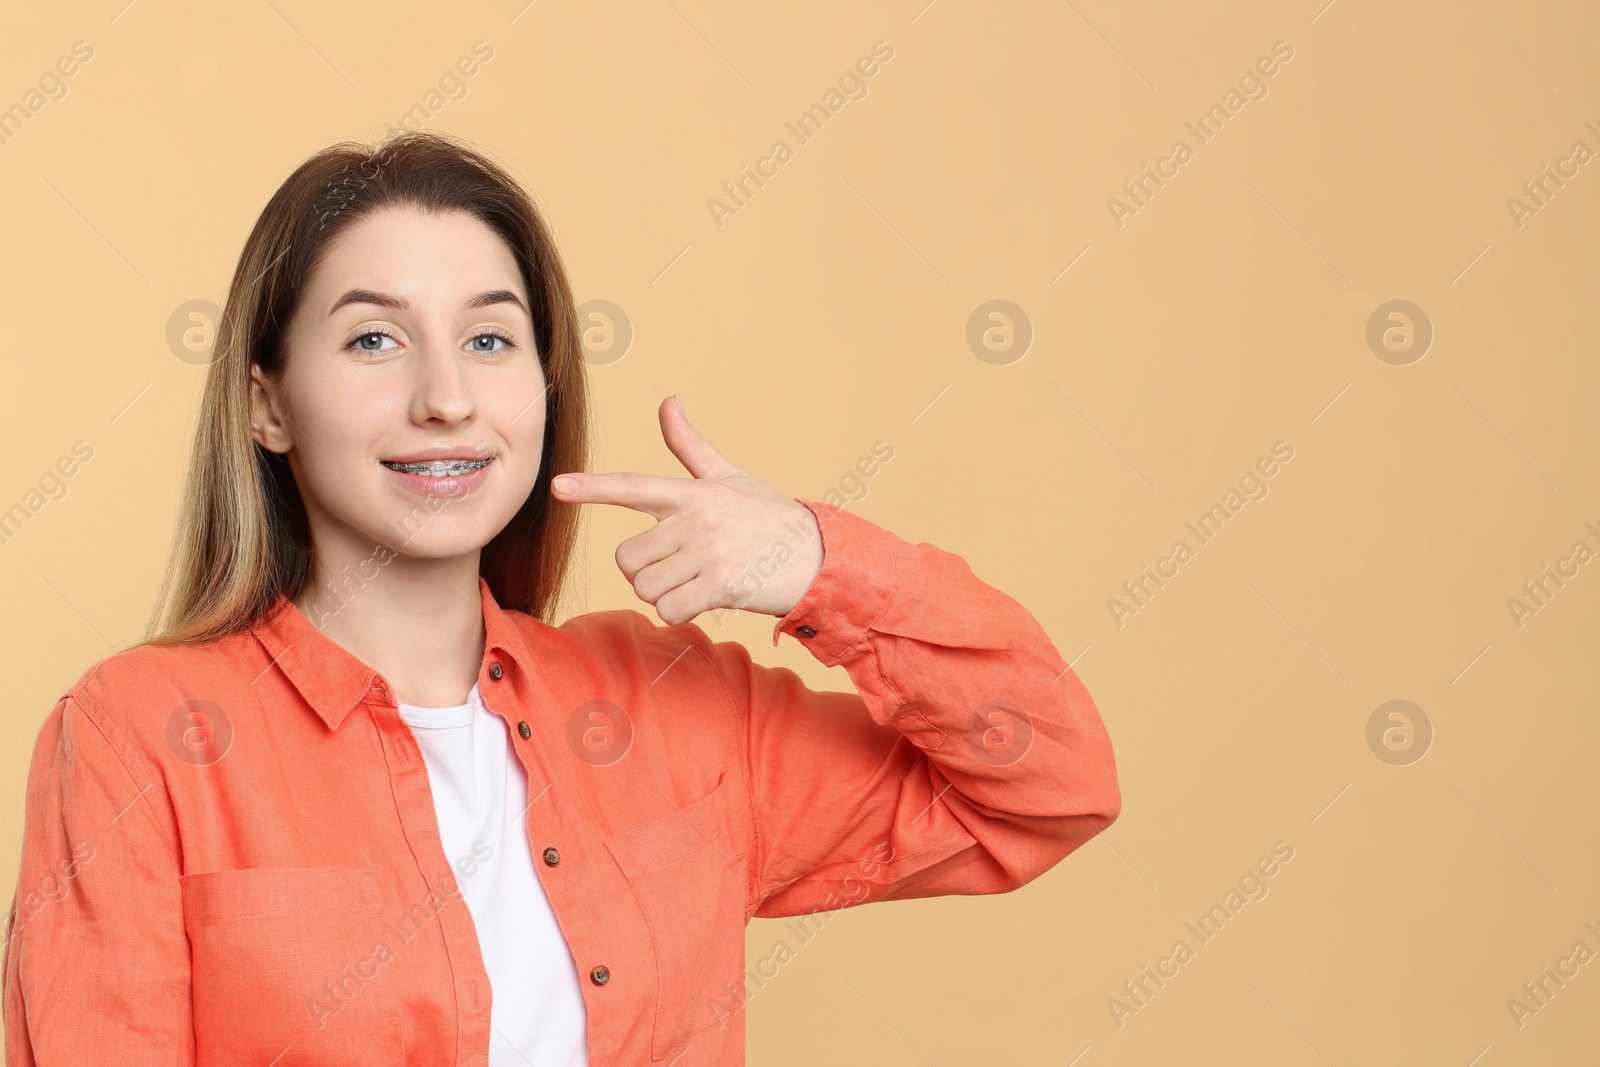 Photo of Portrait of smiling woman pointing at her dental braces on beige background. Space for text